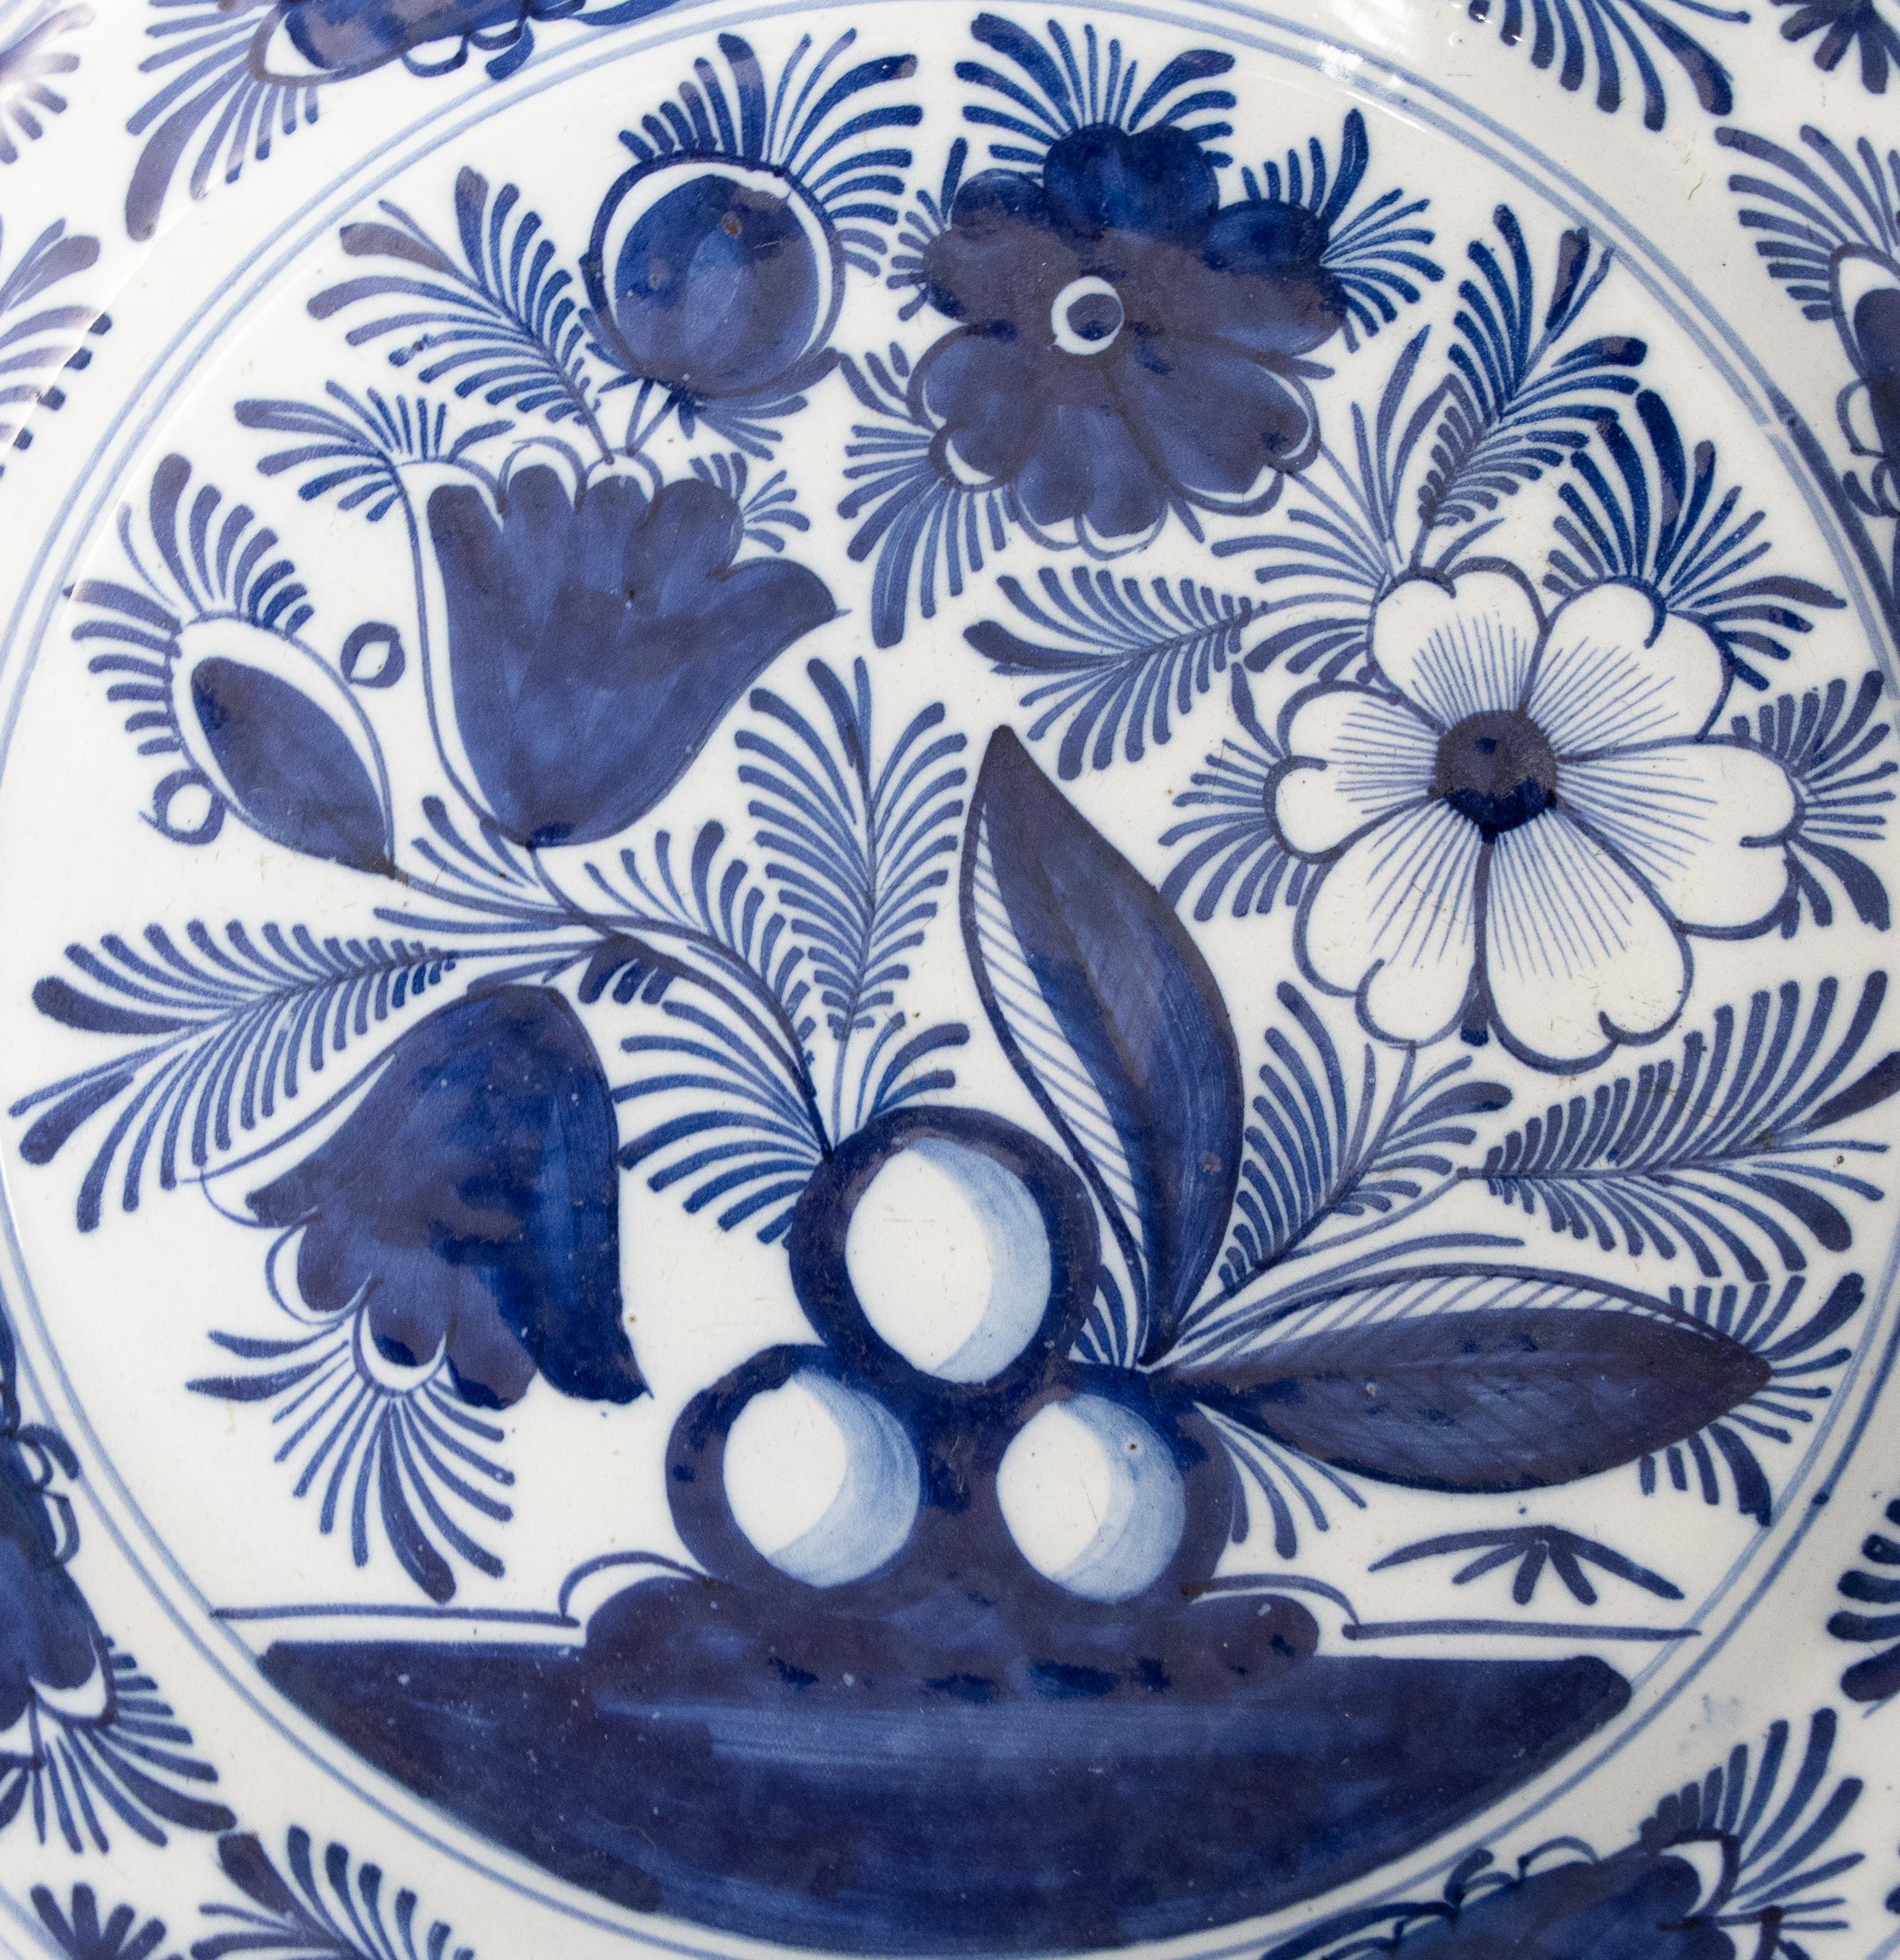 A large 18th-century Dutch Delft charger hand painted with a floral and foliate design in cobalt blue and white, circa 1750. This lovely large plate would be wonderful added to a collection, displayed on a wall, plate rack, or